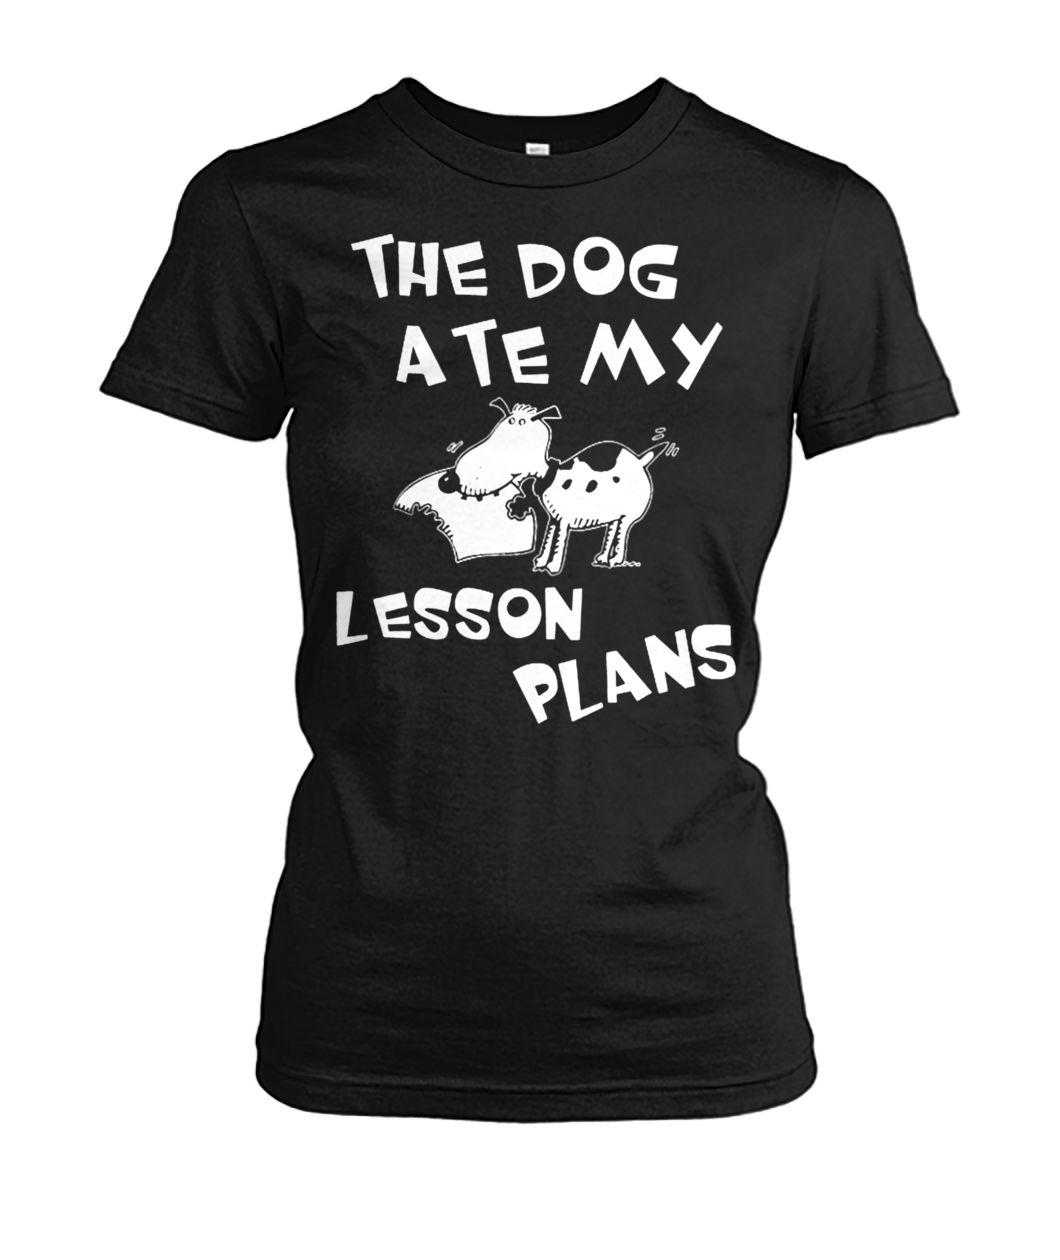 The dog ate my lesson plans women's crew tee